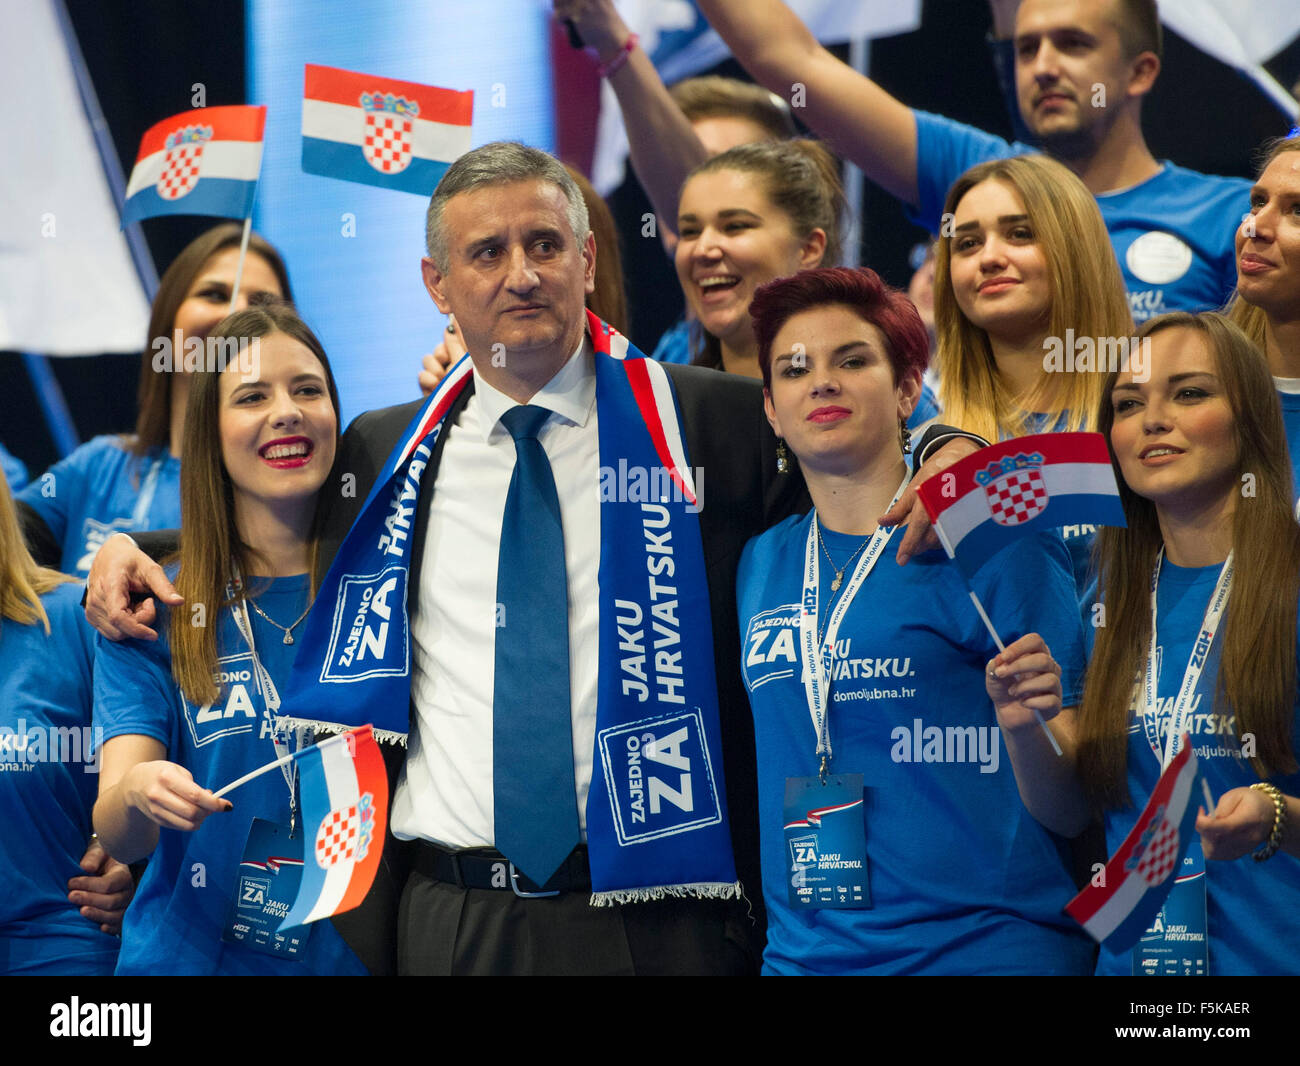 Zagreb, Croatia. 5th Nov, 2015. Leader of the opposition Croatian Democratic Union (HDZ) Tomislav Karamarko (2nd L) delivers a speech during Patriotic Coalition campaign rally at Zagreb Arena in Zagreb, capital of Croatia, Nov. 5, 2015. An opinion poll published by Croatian Nova TV on Thursday evening showed the result of parliamentary election scheduled for Sunday could be neck-and-neck for the country's two largest coalitions. Credit:  Miso Lisanin/Xinhua/Alamy Live News Stock Photo